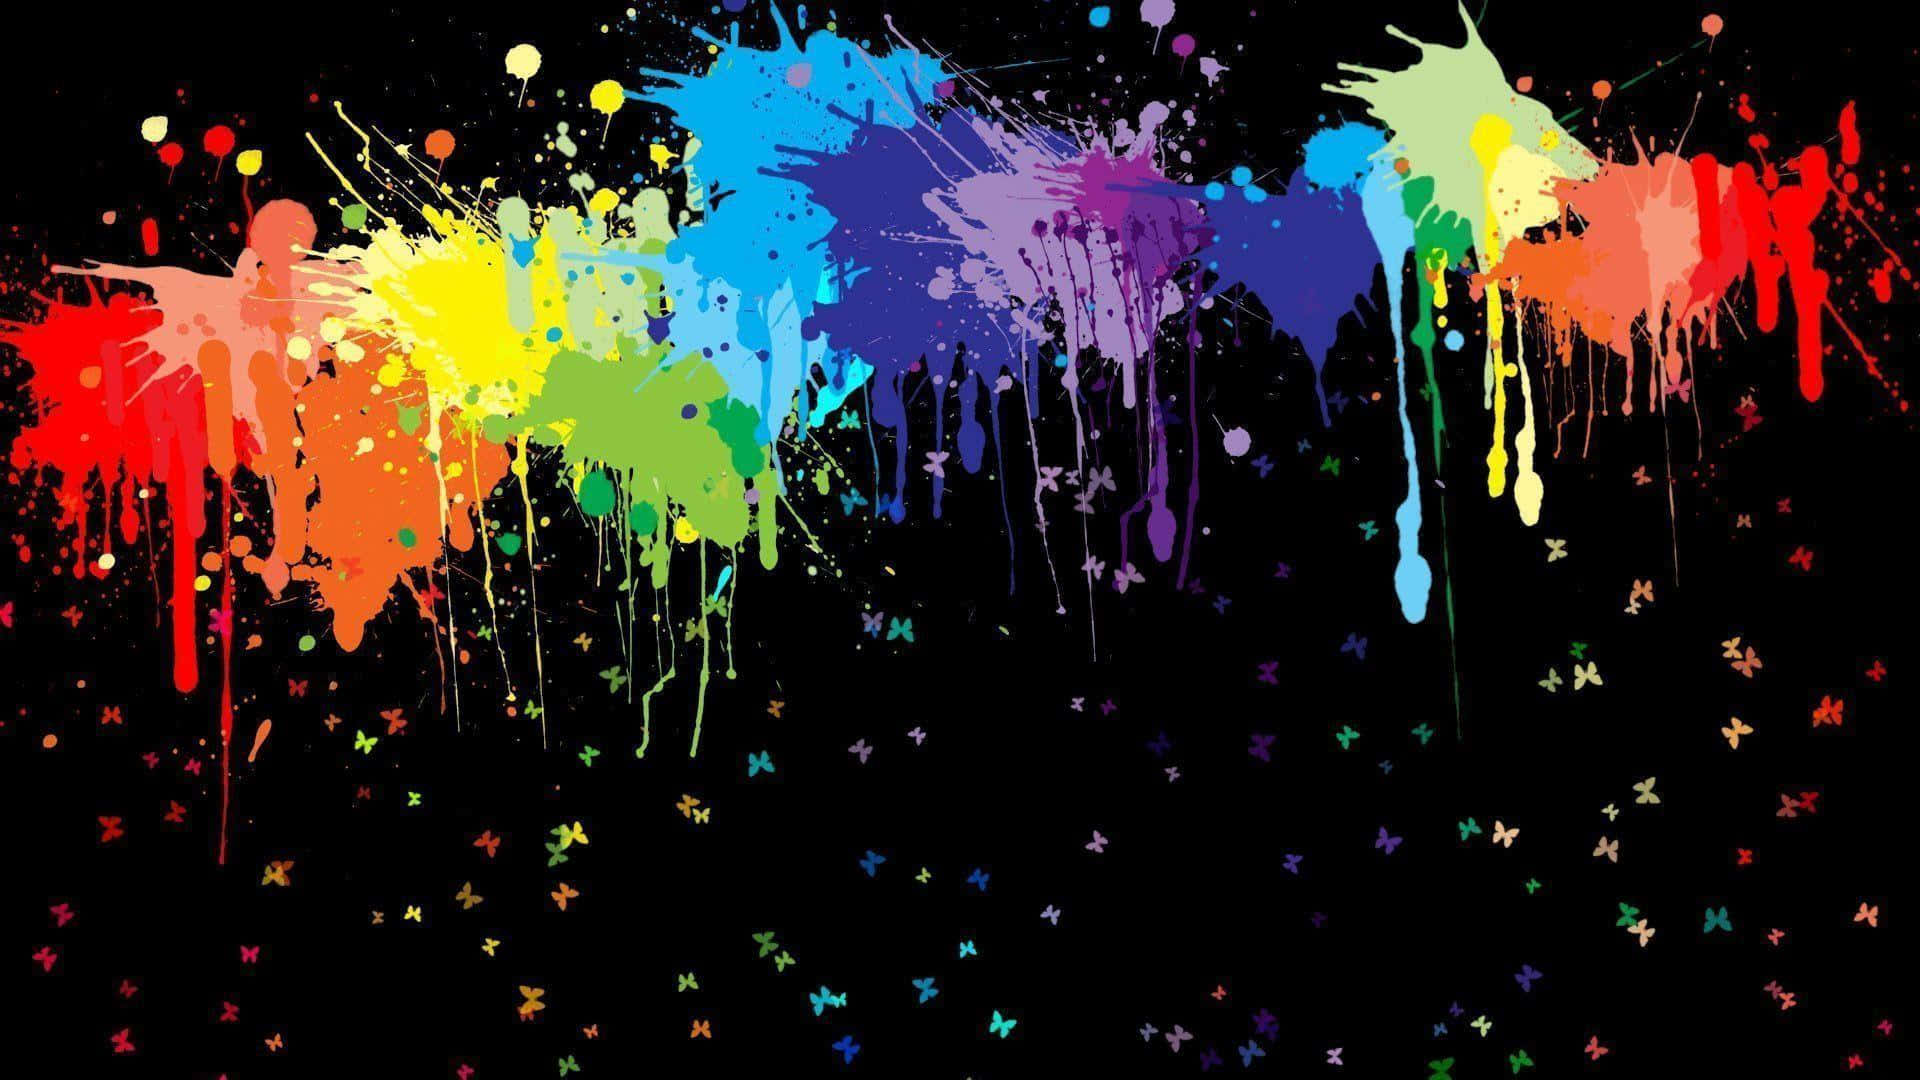 Explore the Colorful World of Abstract Art Wallpaper